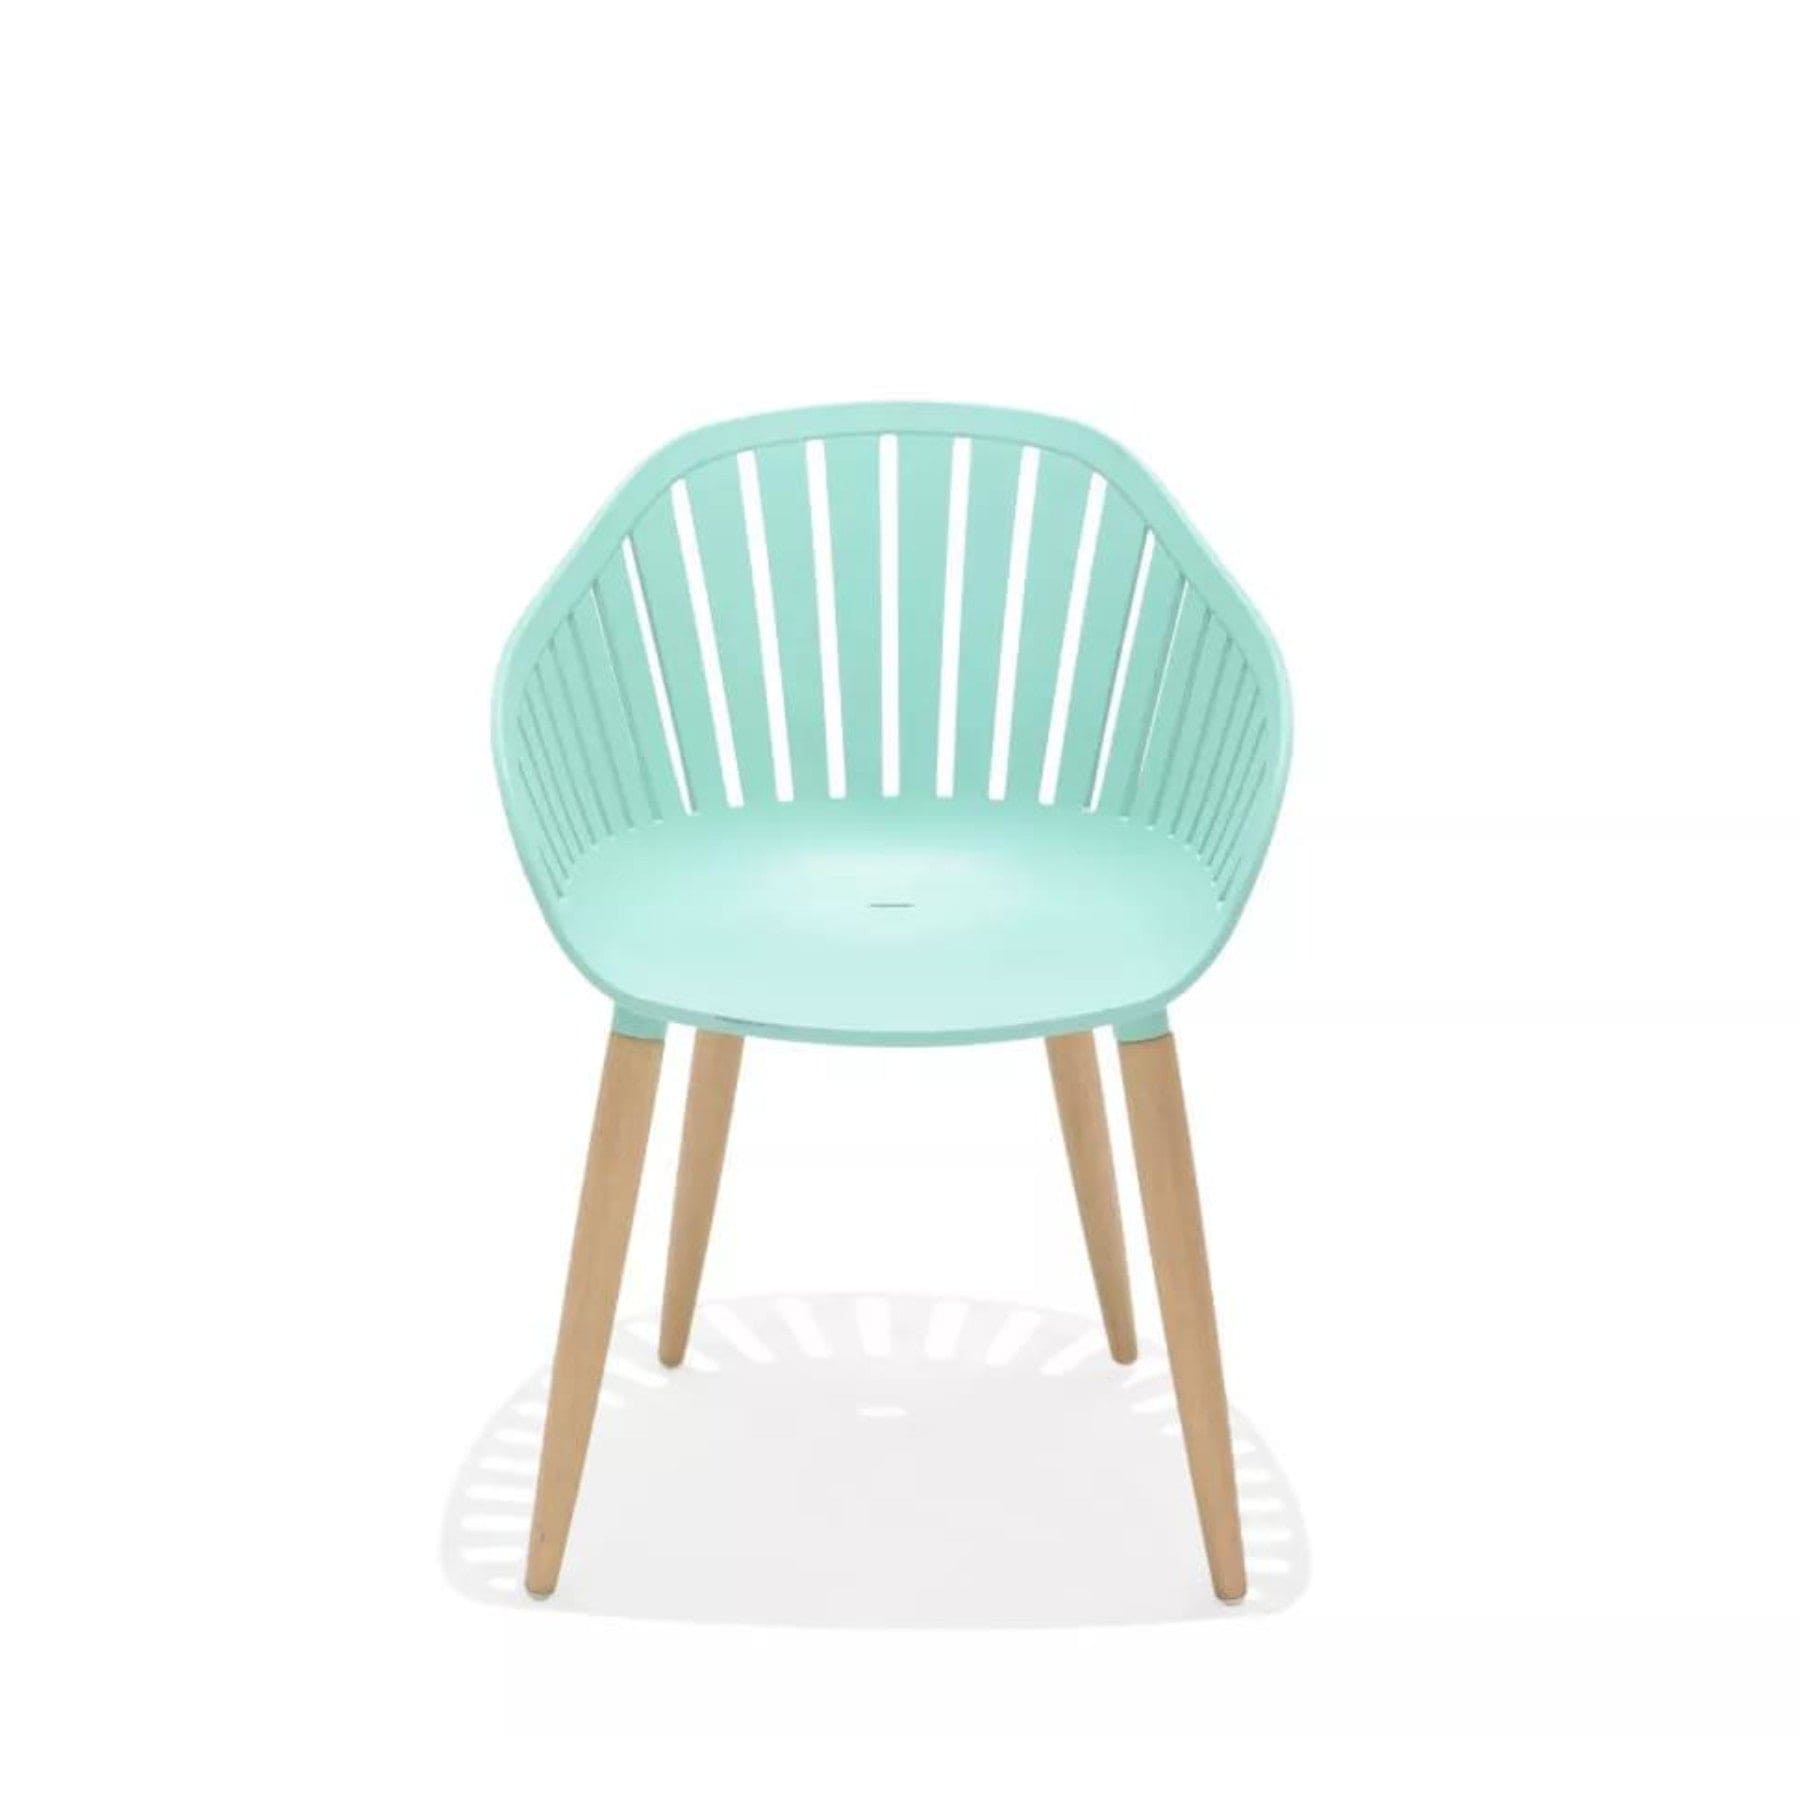 Modern mint green chair with wooden legs, minimalist Scandinavian style furniture, isolated on white background.